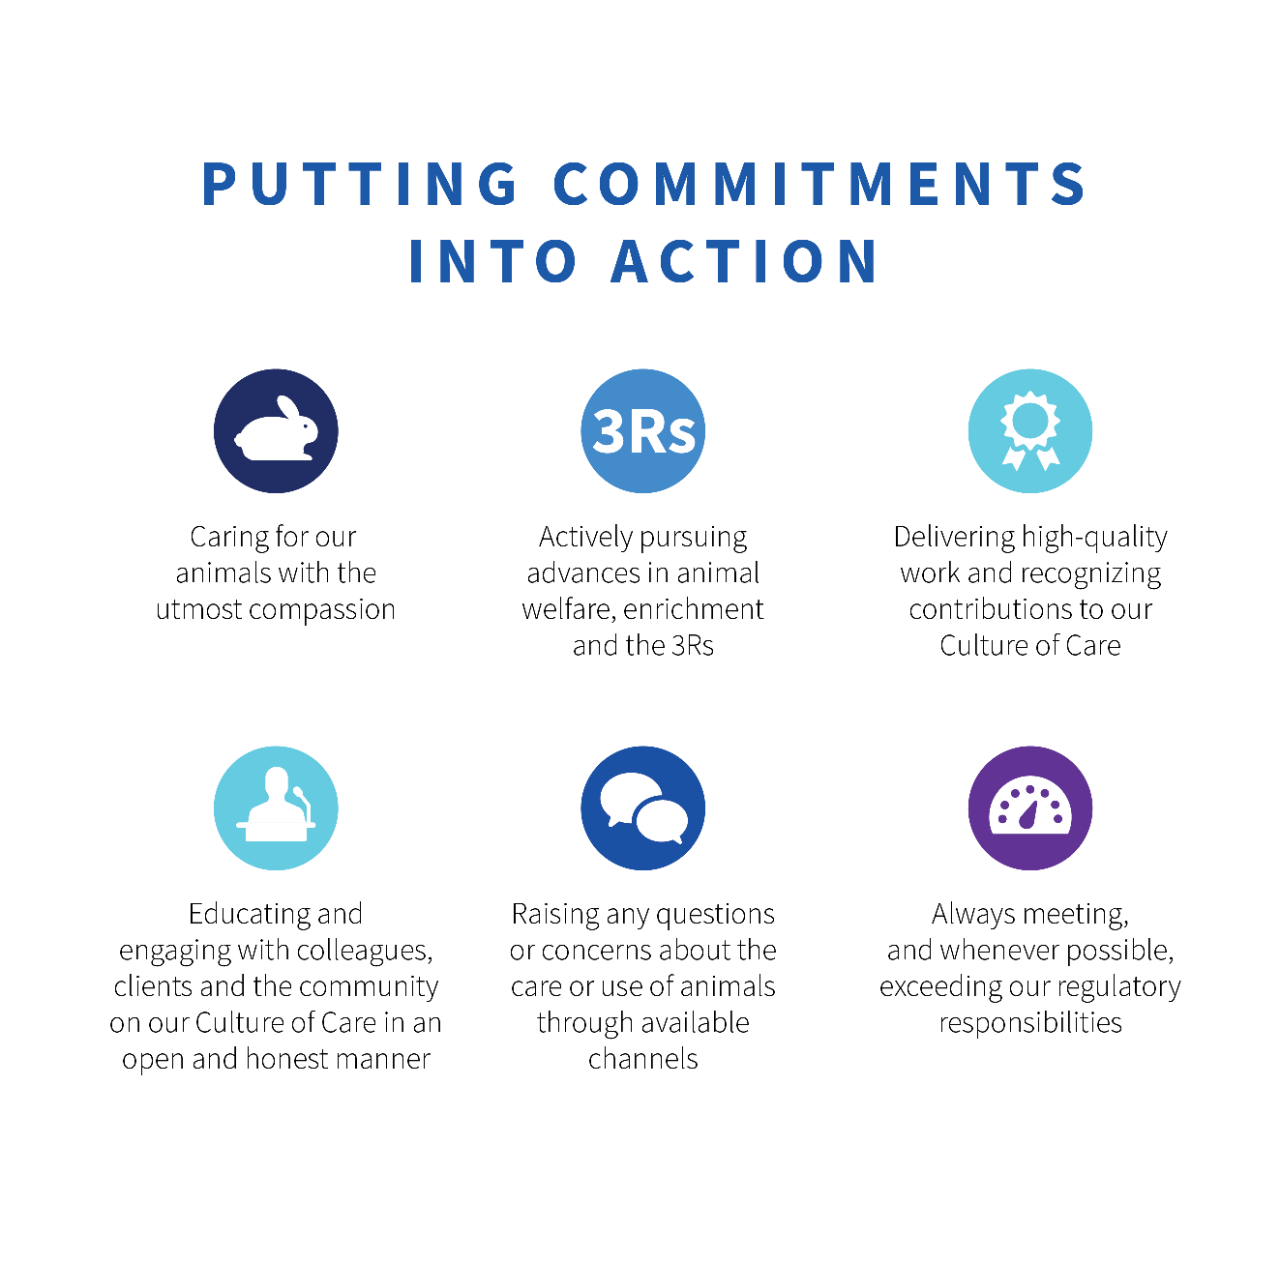 Putting Commitments into Action